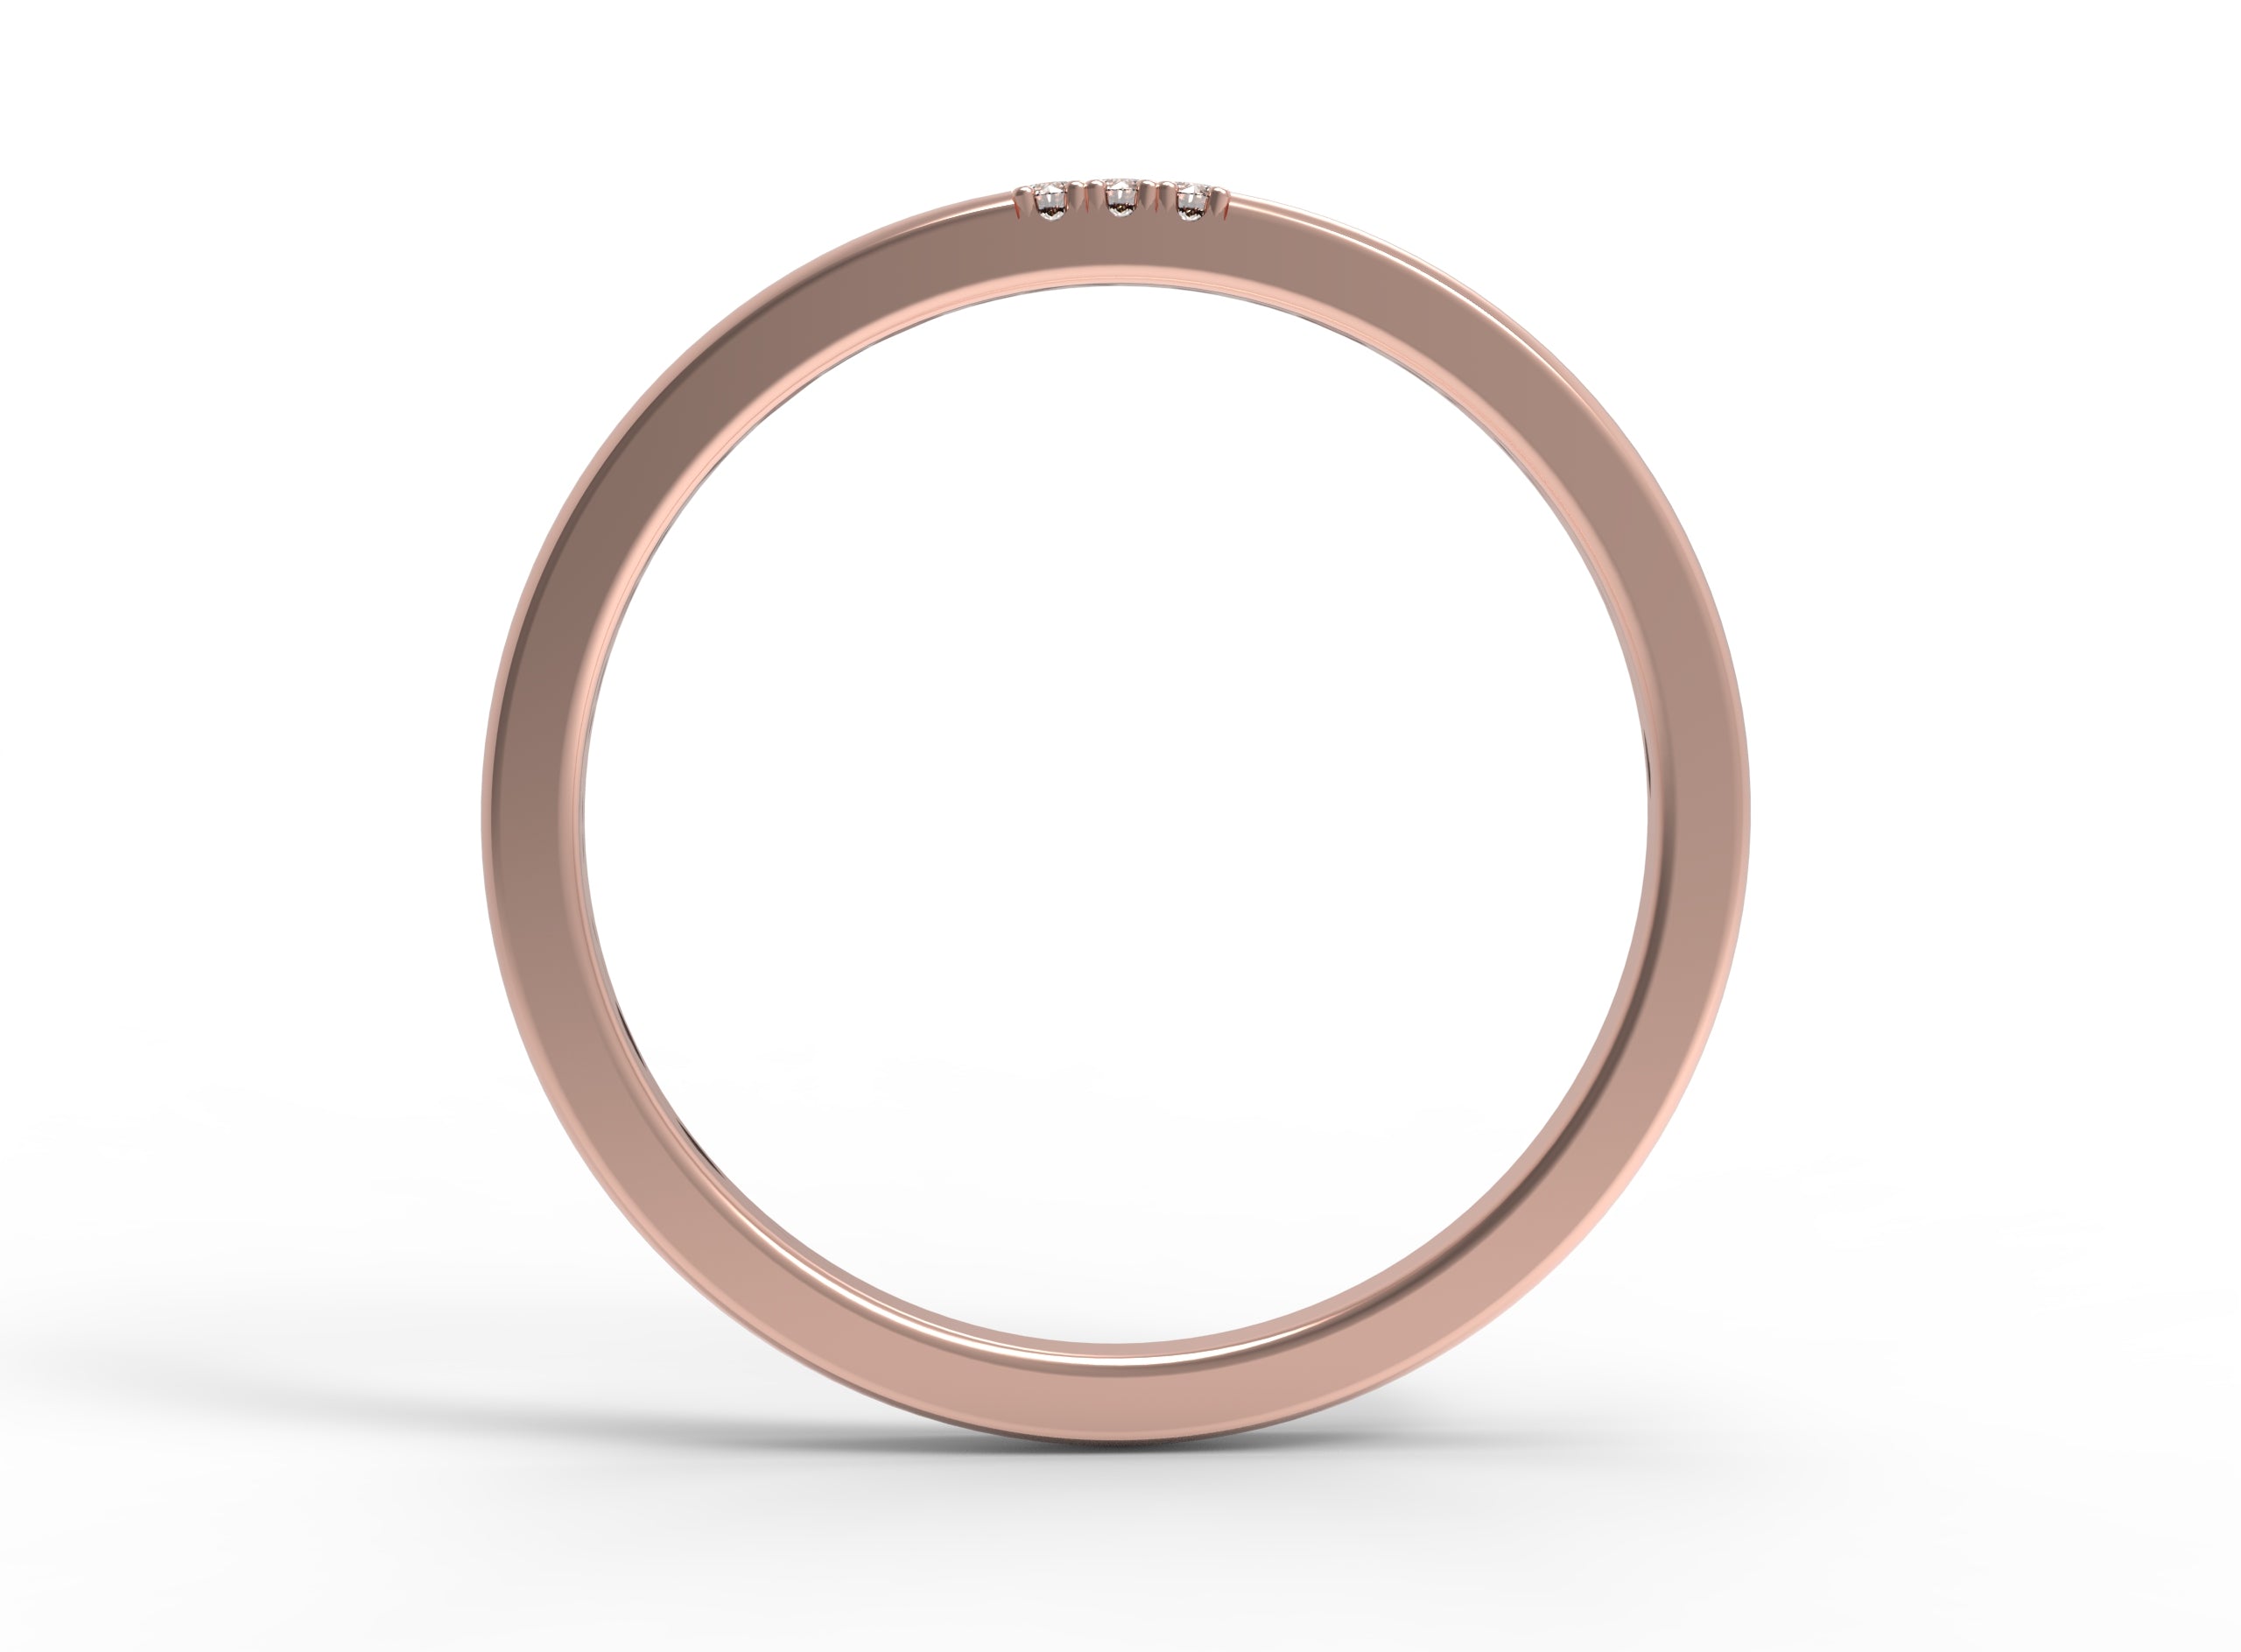 Close up of the Pave Jane womens wedding band by Fluid Jewellery in rose gold 3